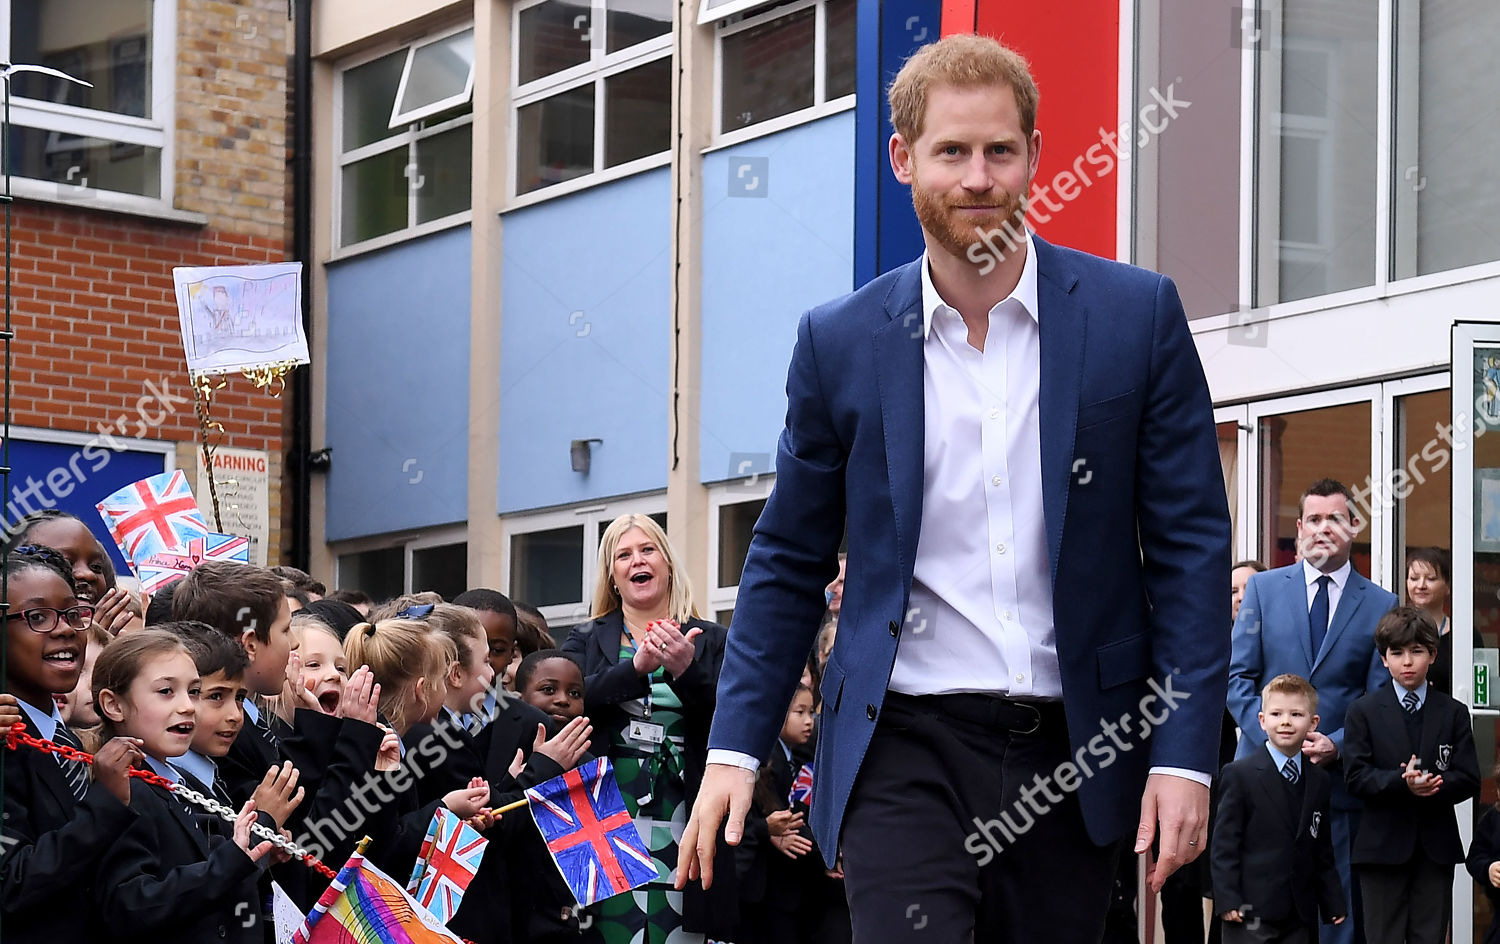 prince-harry-visits-st-vincents-catholic-primary-school-for-commonwealth-canopy-and-woodland-trust-tree-planting-ceremony-london-uk-shutterstock-editorial-10160984ap.jpg